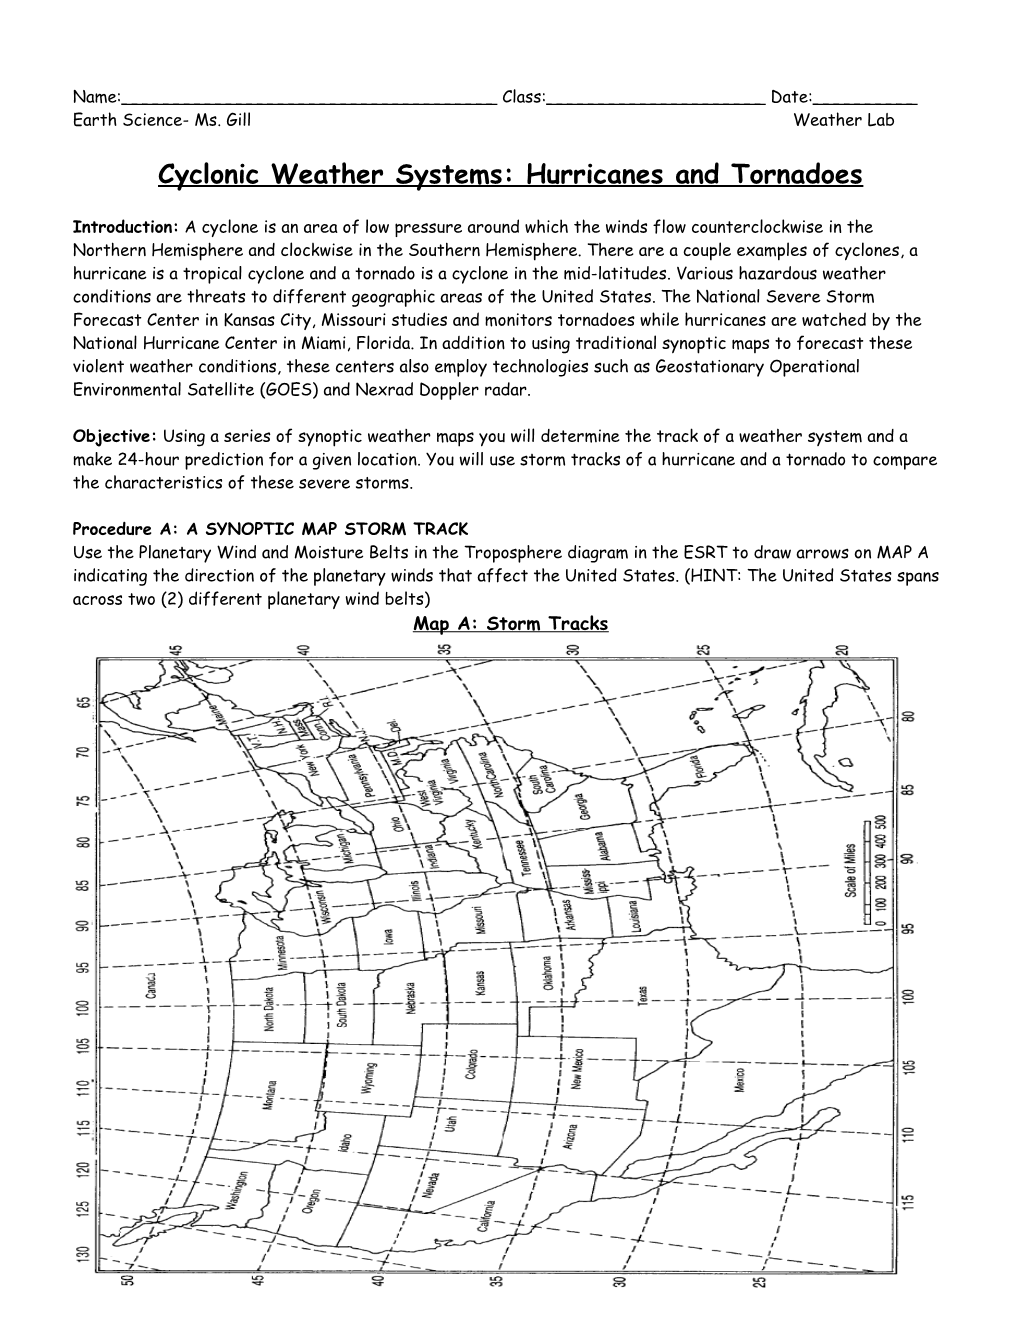 Cyclonic Weather Systems: Hurricanes and Tornadoes